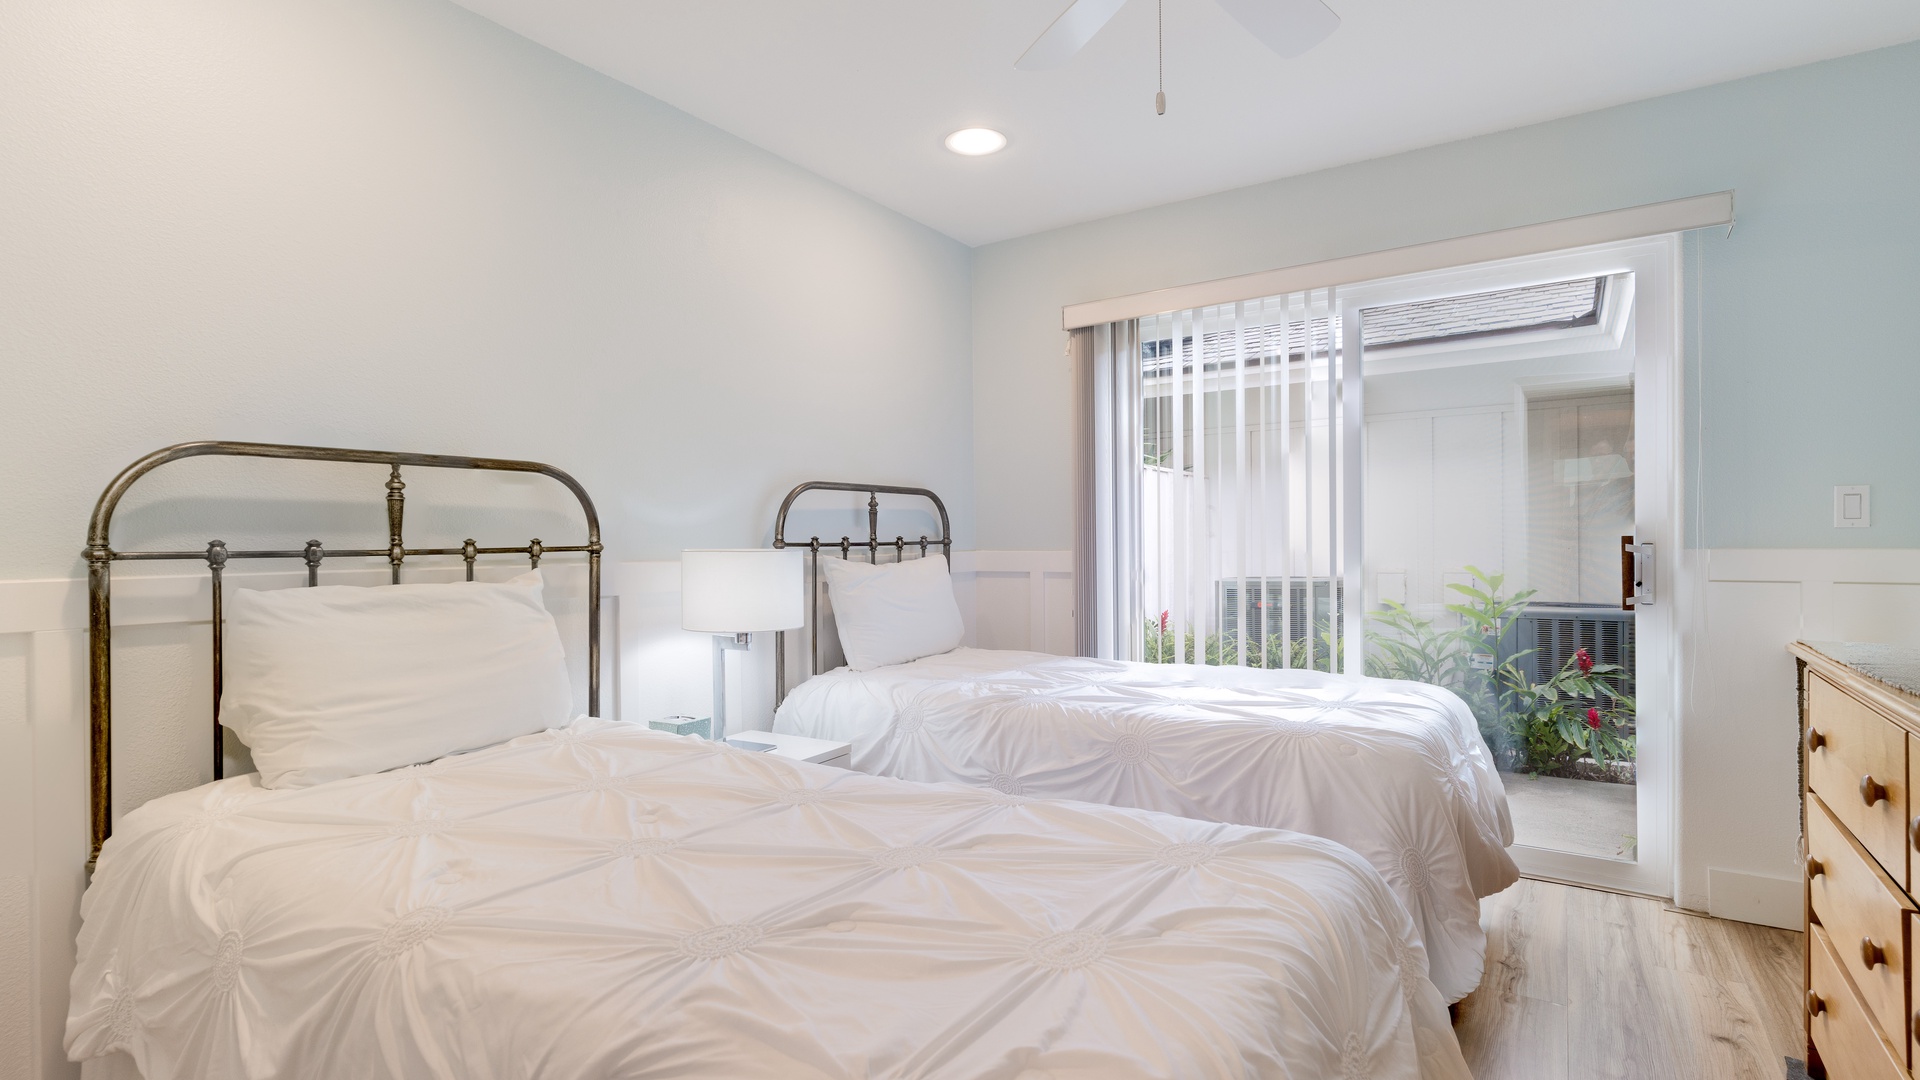 Kapolei Vacation Rentals, Coconut Plantation 1110-3 - The second guest bedroom with two beds and a view.